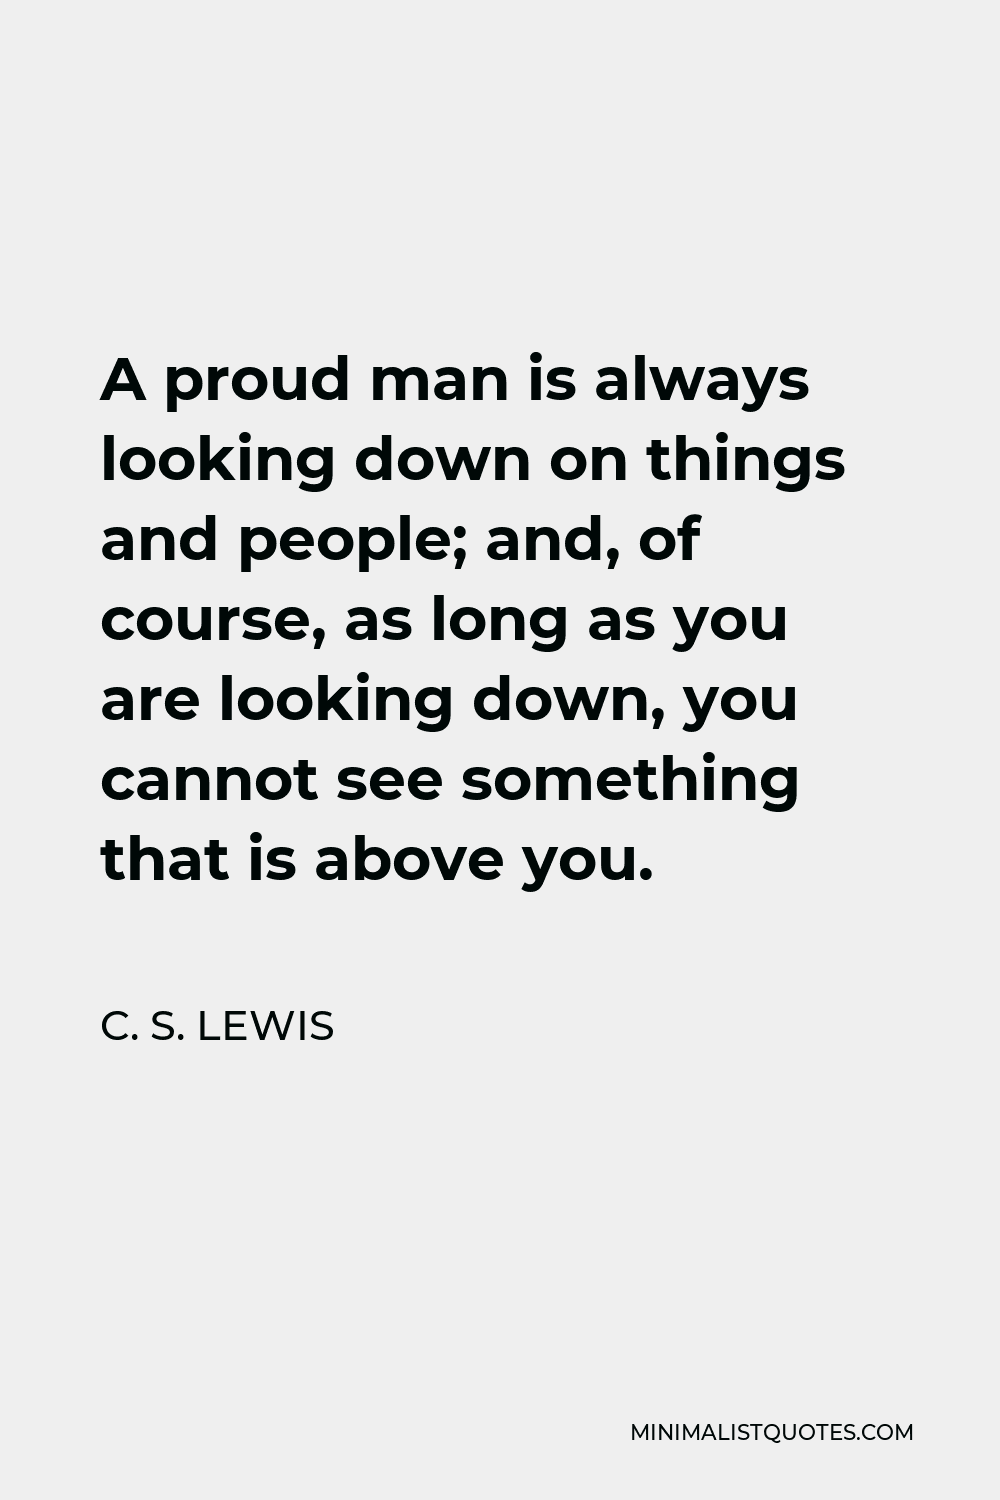 C. S. Lewis Quote - A proud man is always looking down on things and people; and, of course, as long as you are looking down, you cannot see something that is above you.